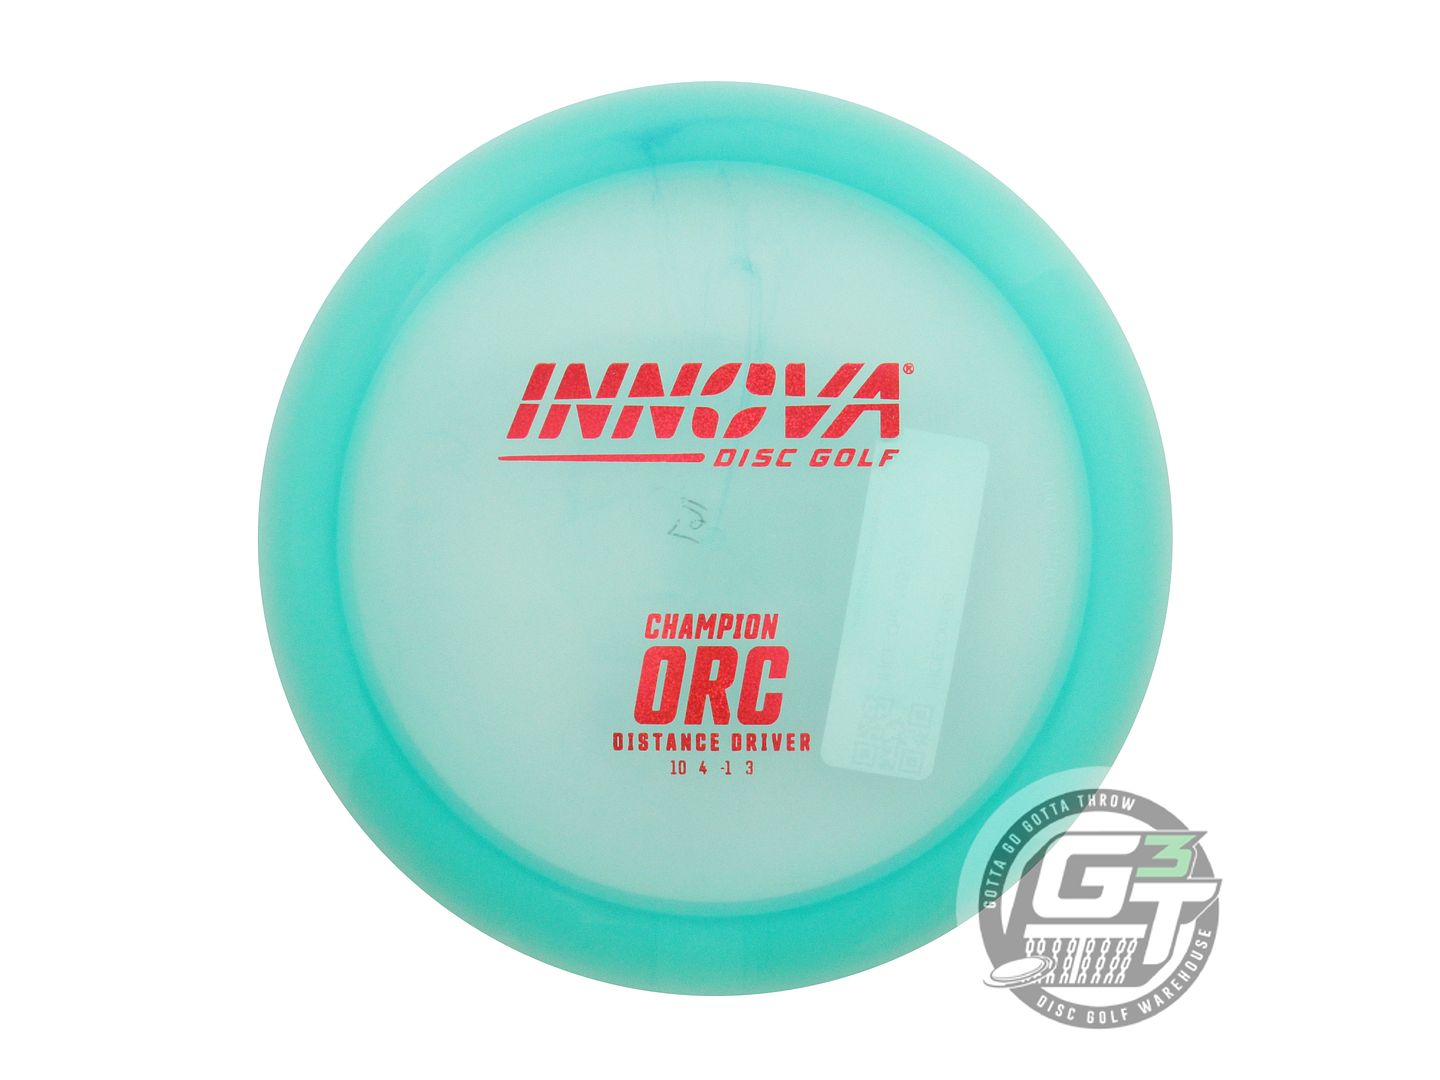 Innova Champion Orc Distance Driver Golf Disc (Individually Listed)